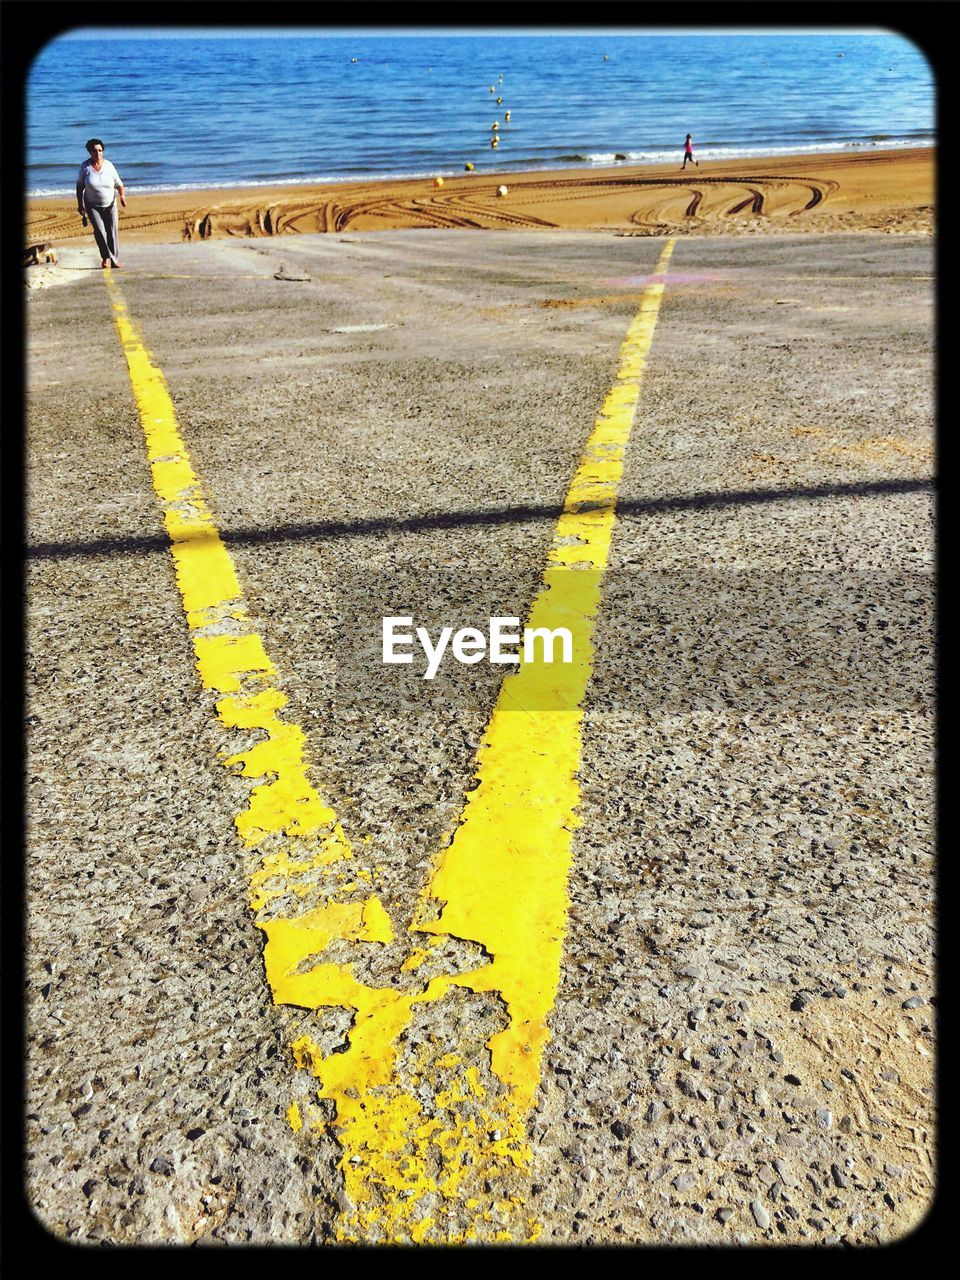 yellow, road marking, marking, road, sign, symbol, transportation, transfer print, day, auto post production filter, water, nature, guidance, asphalt, outdoors, communication, beach, high angle view, road sign, city, double yellow line, street, sea, sunlight, no people, land